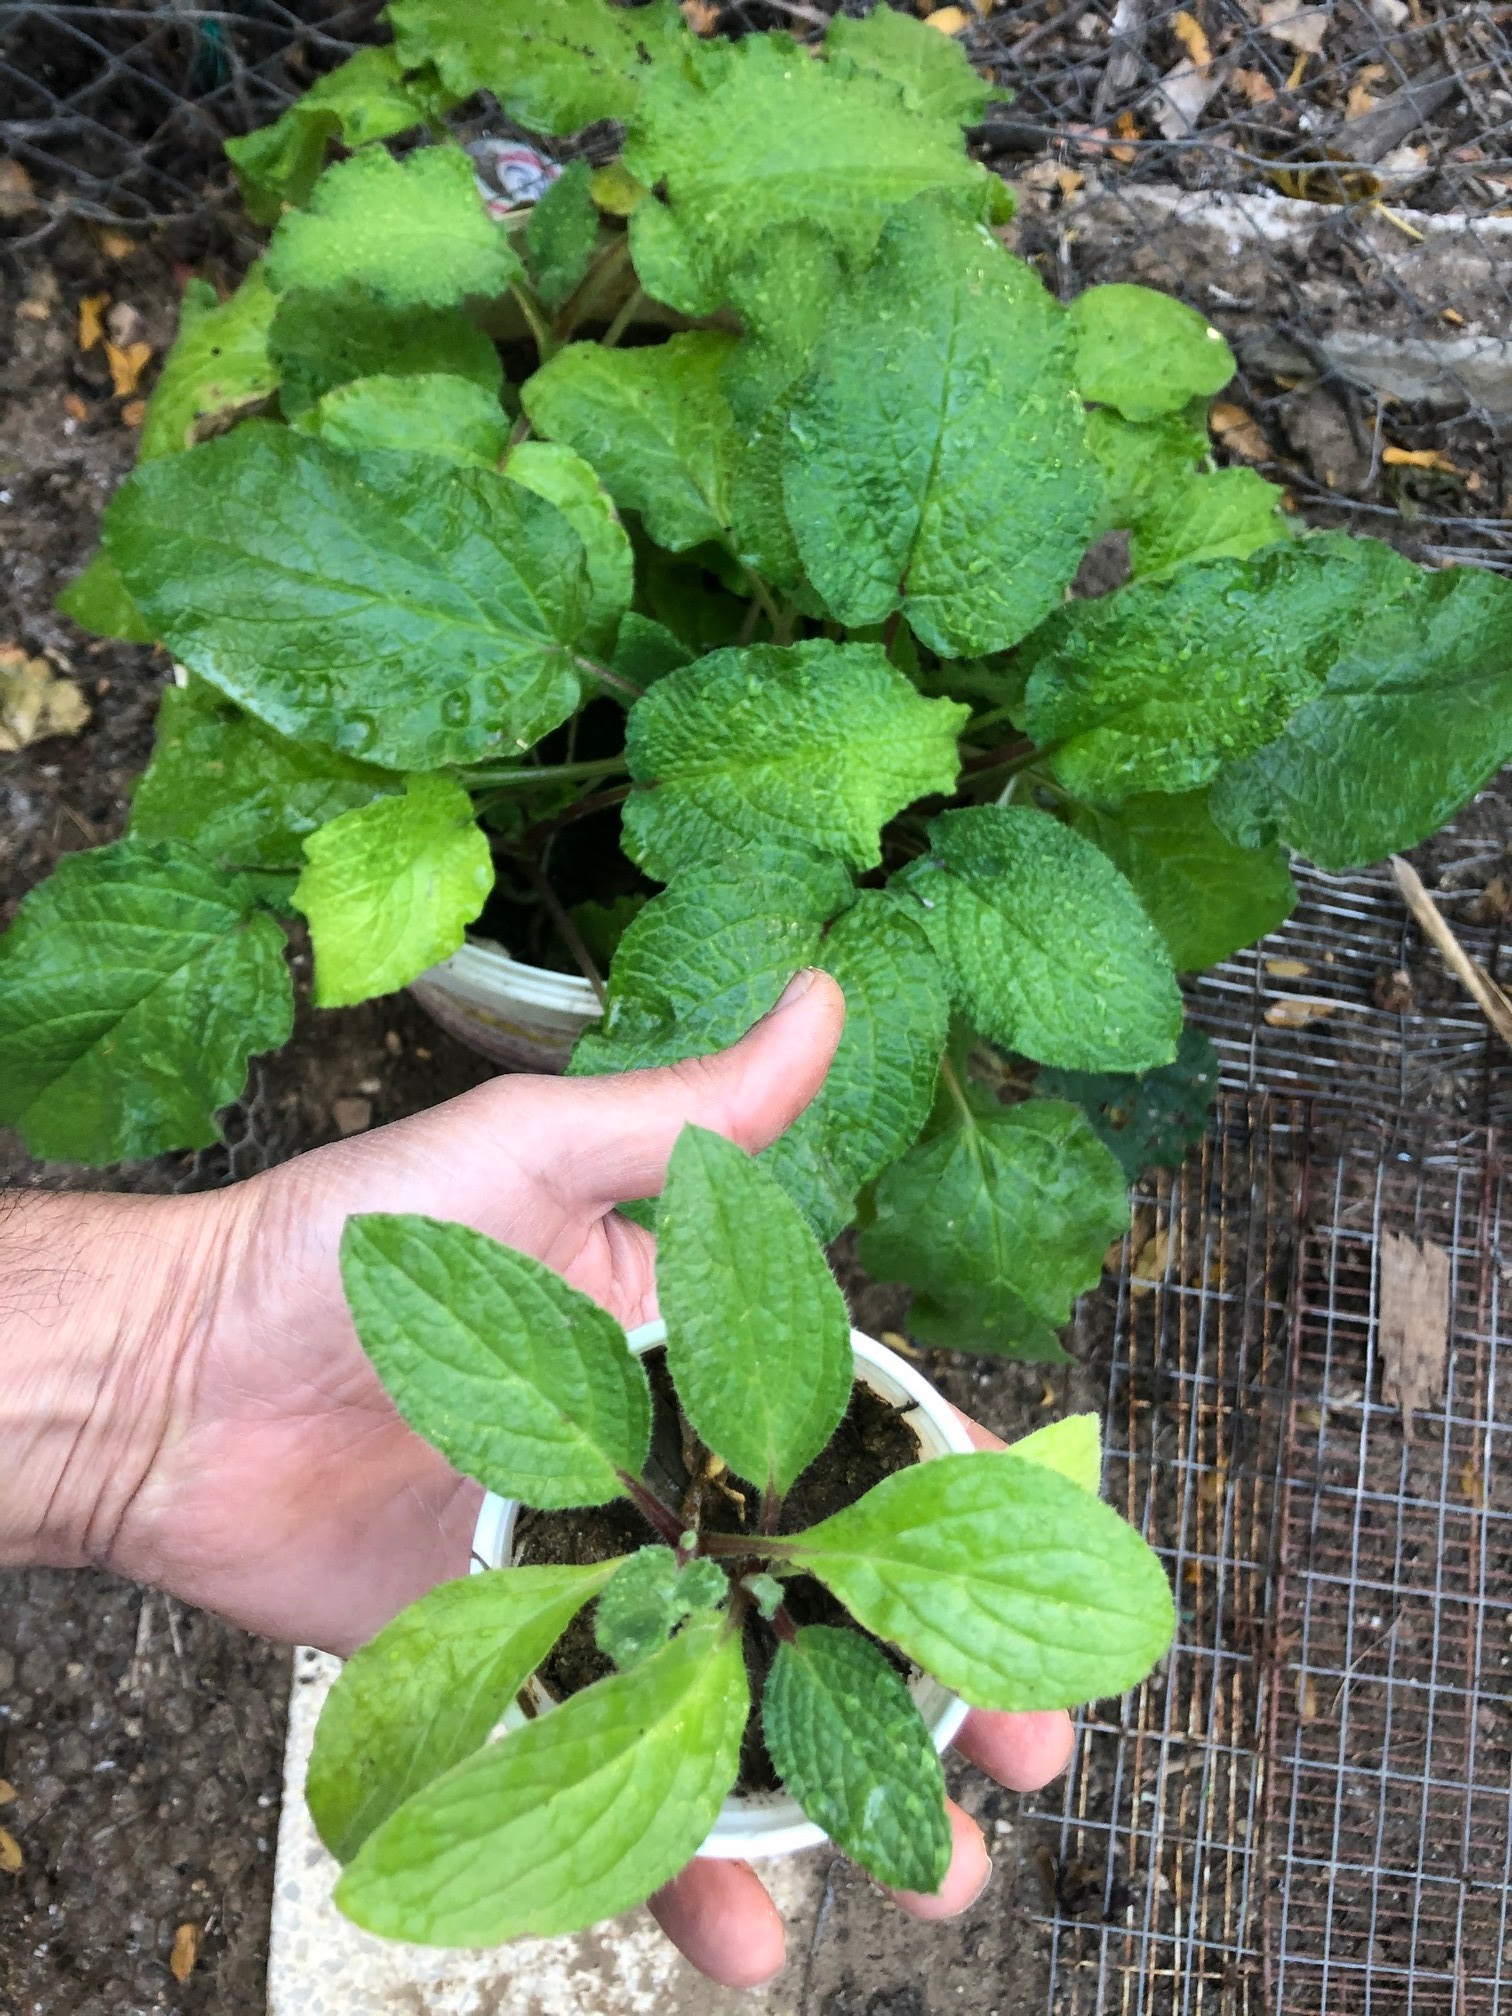 if you have started your borage indoors, you can successfully transplant borage seedlings as long as it is done with special care to not harm the roots.